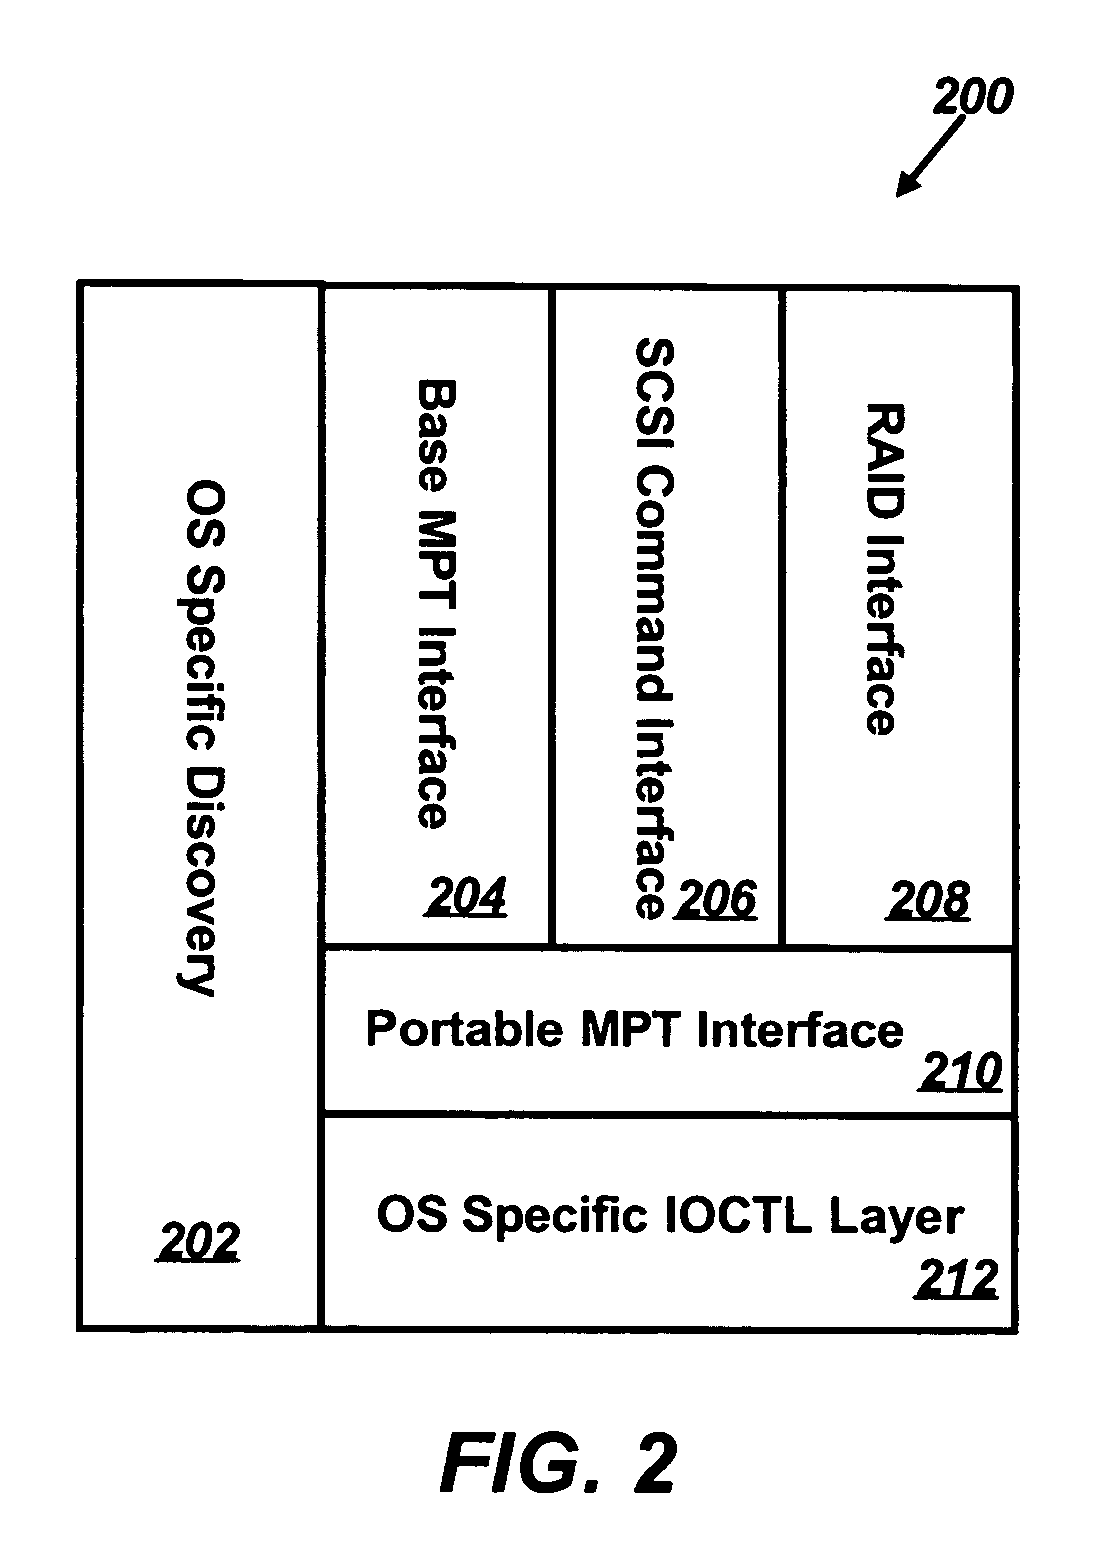 Application programming interface for fusion message passing technology